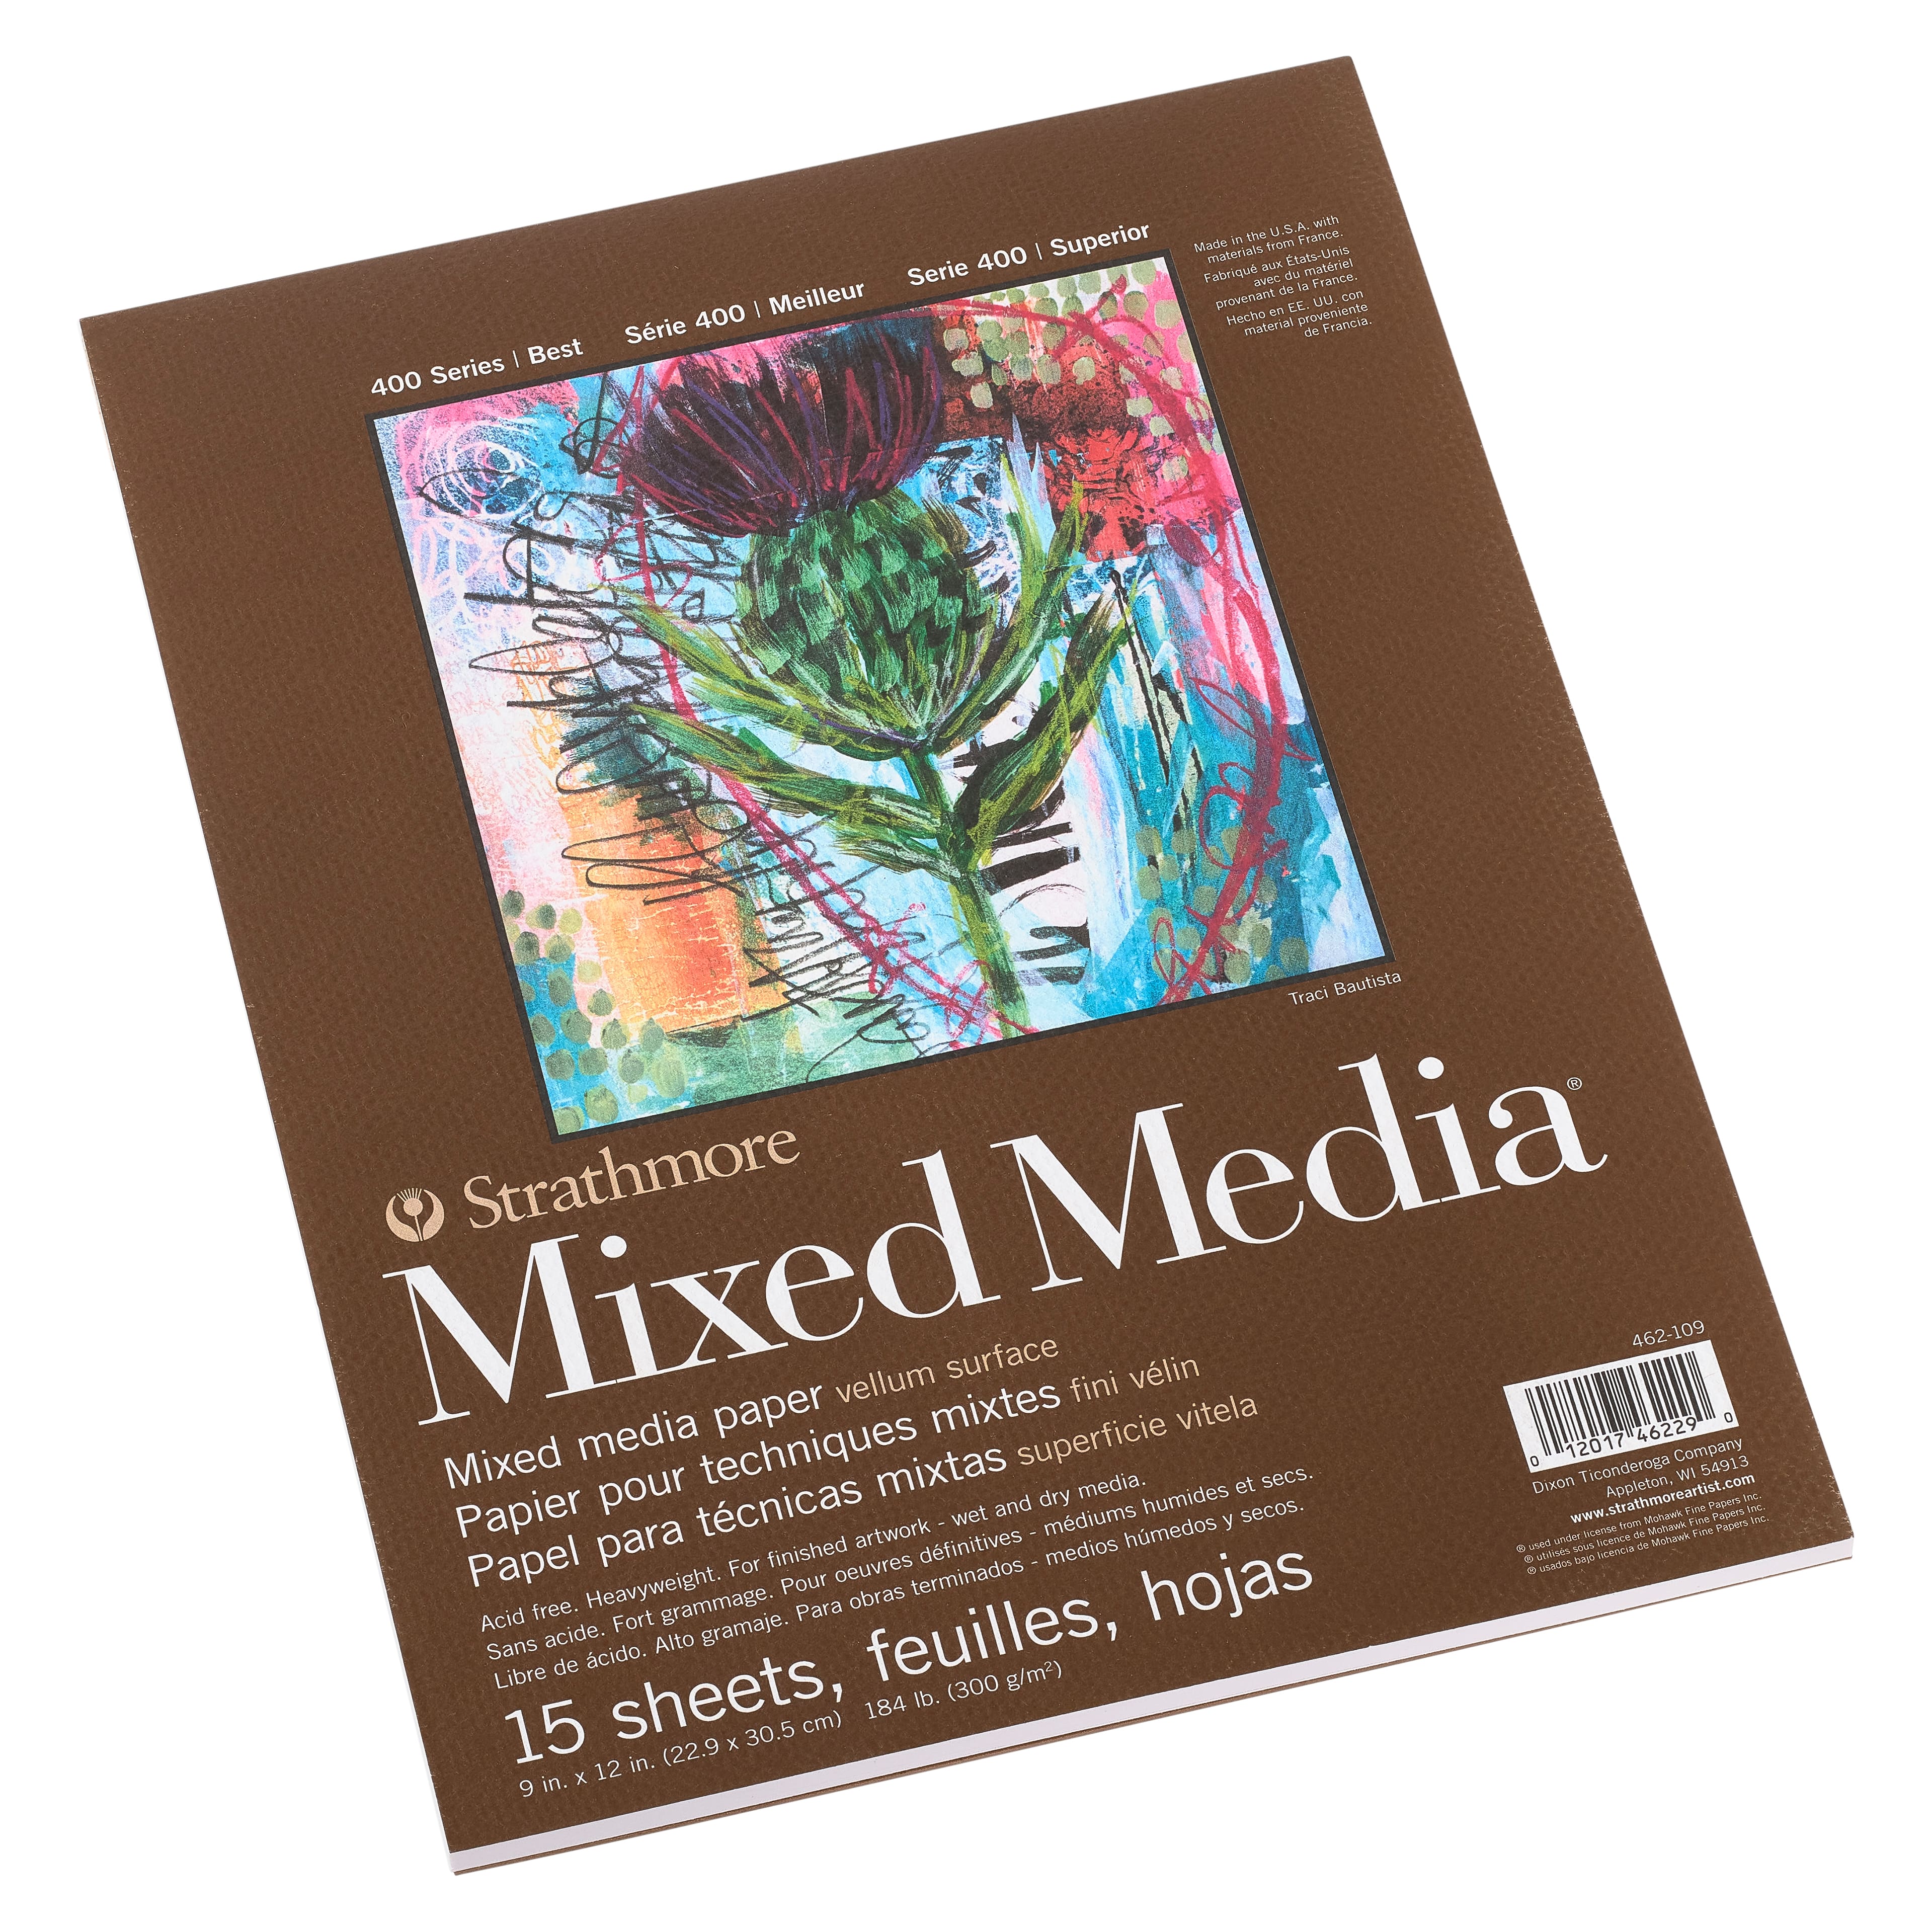 Strathmore Mixed Media Paper Pad 400 Series 15 Sheets 9 x 12